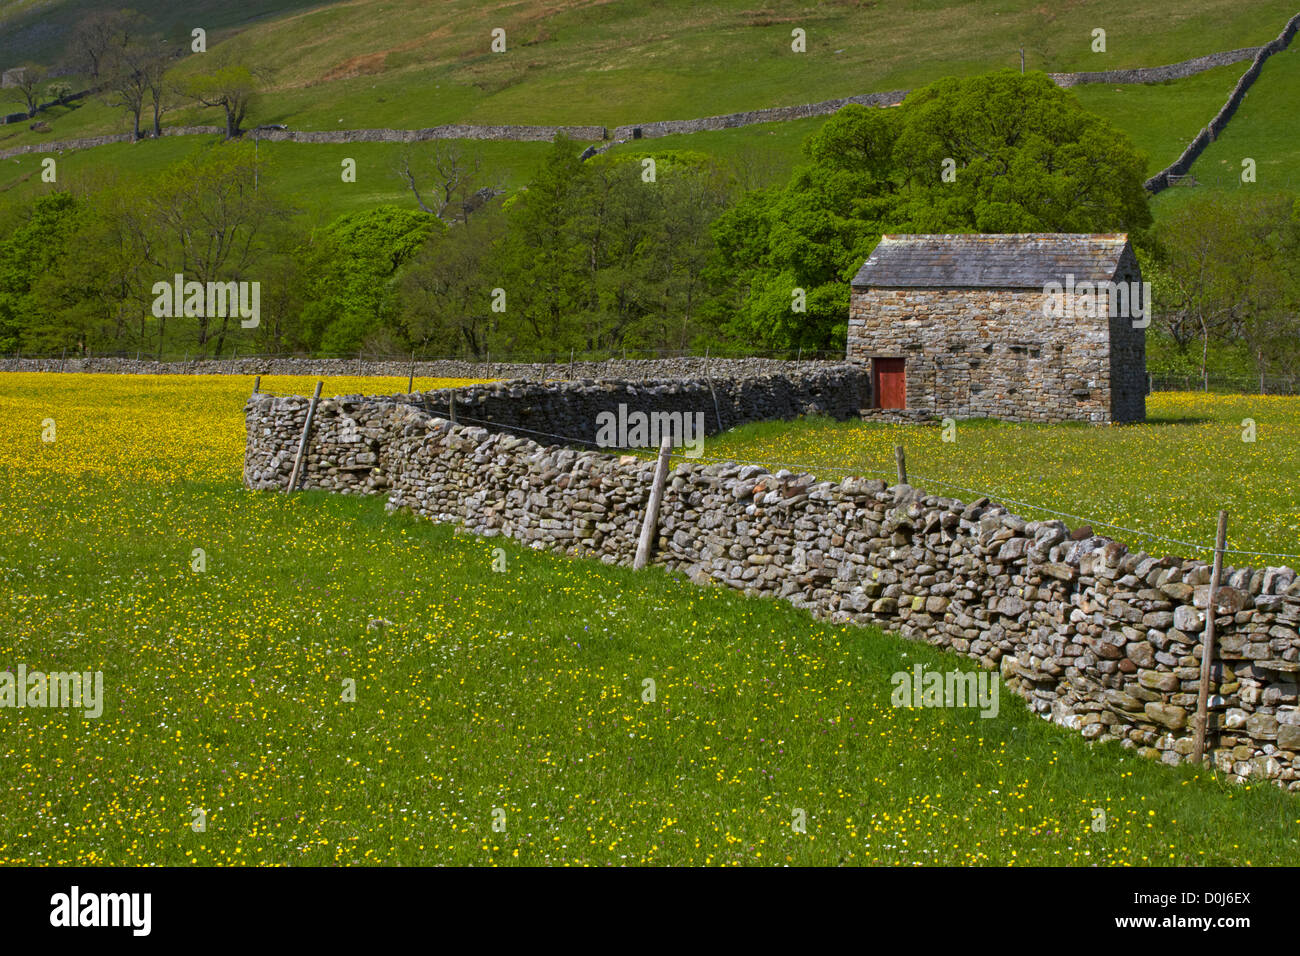 A stone barn and drystone walls in the buttercup meadows of Swaledale. Stock Photo